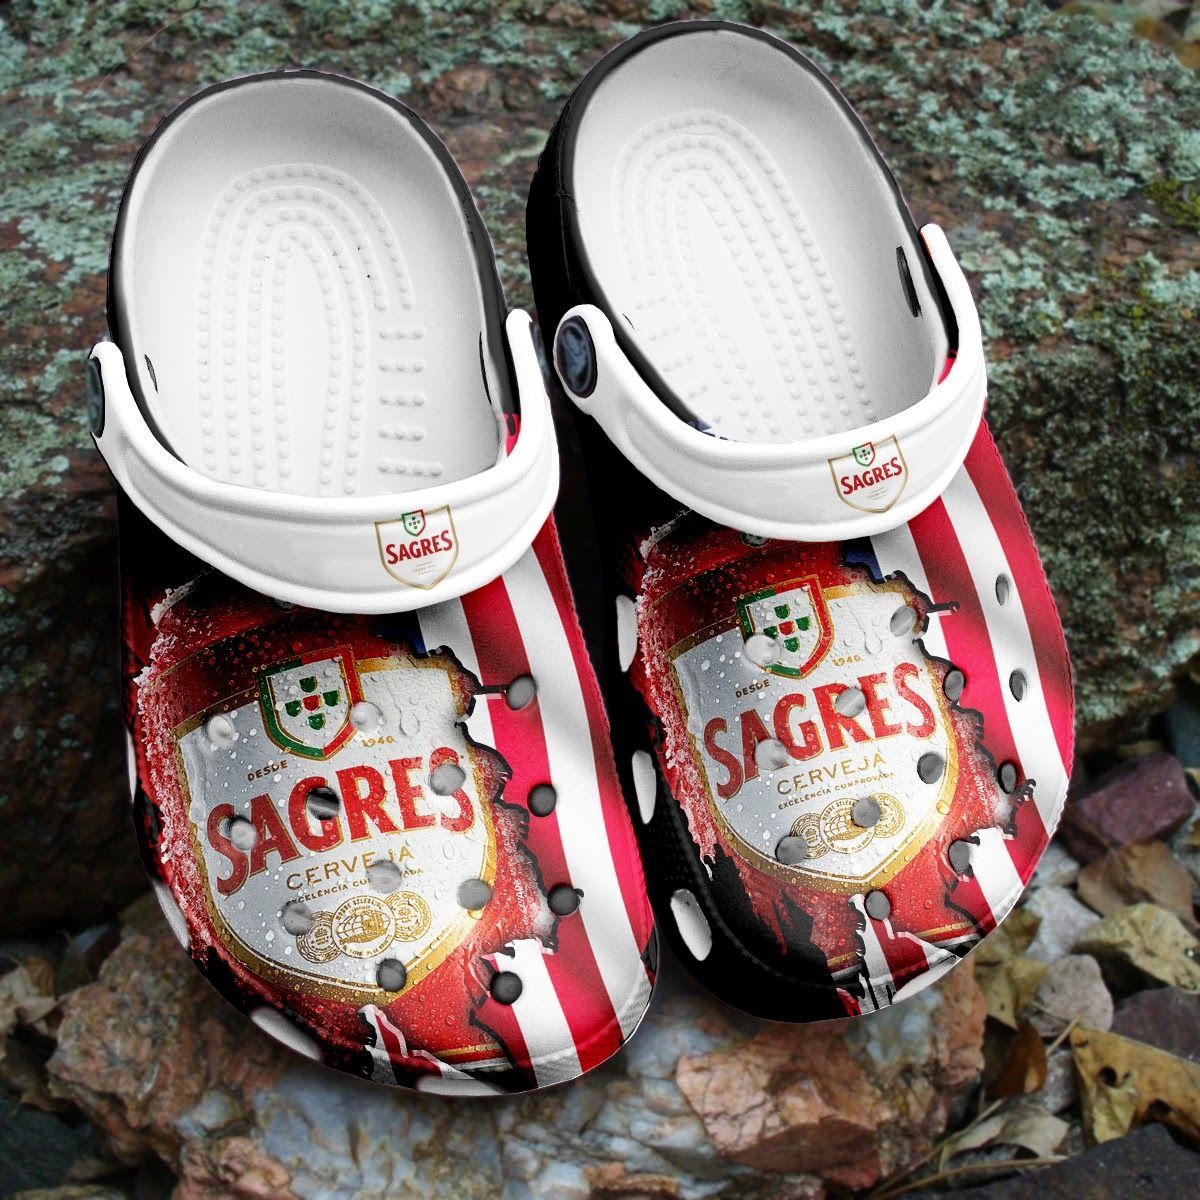 If you'd like to purchase a pair of Crocband Clogs, be sure to check out the official website. 138